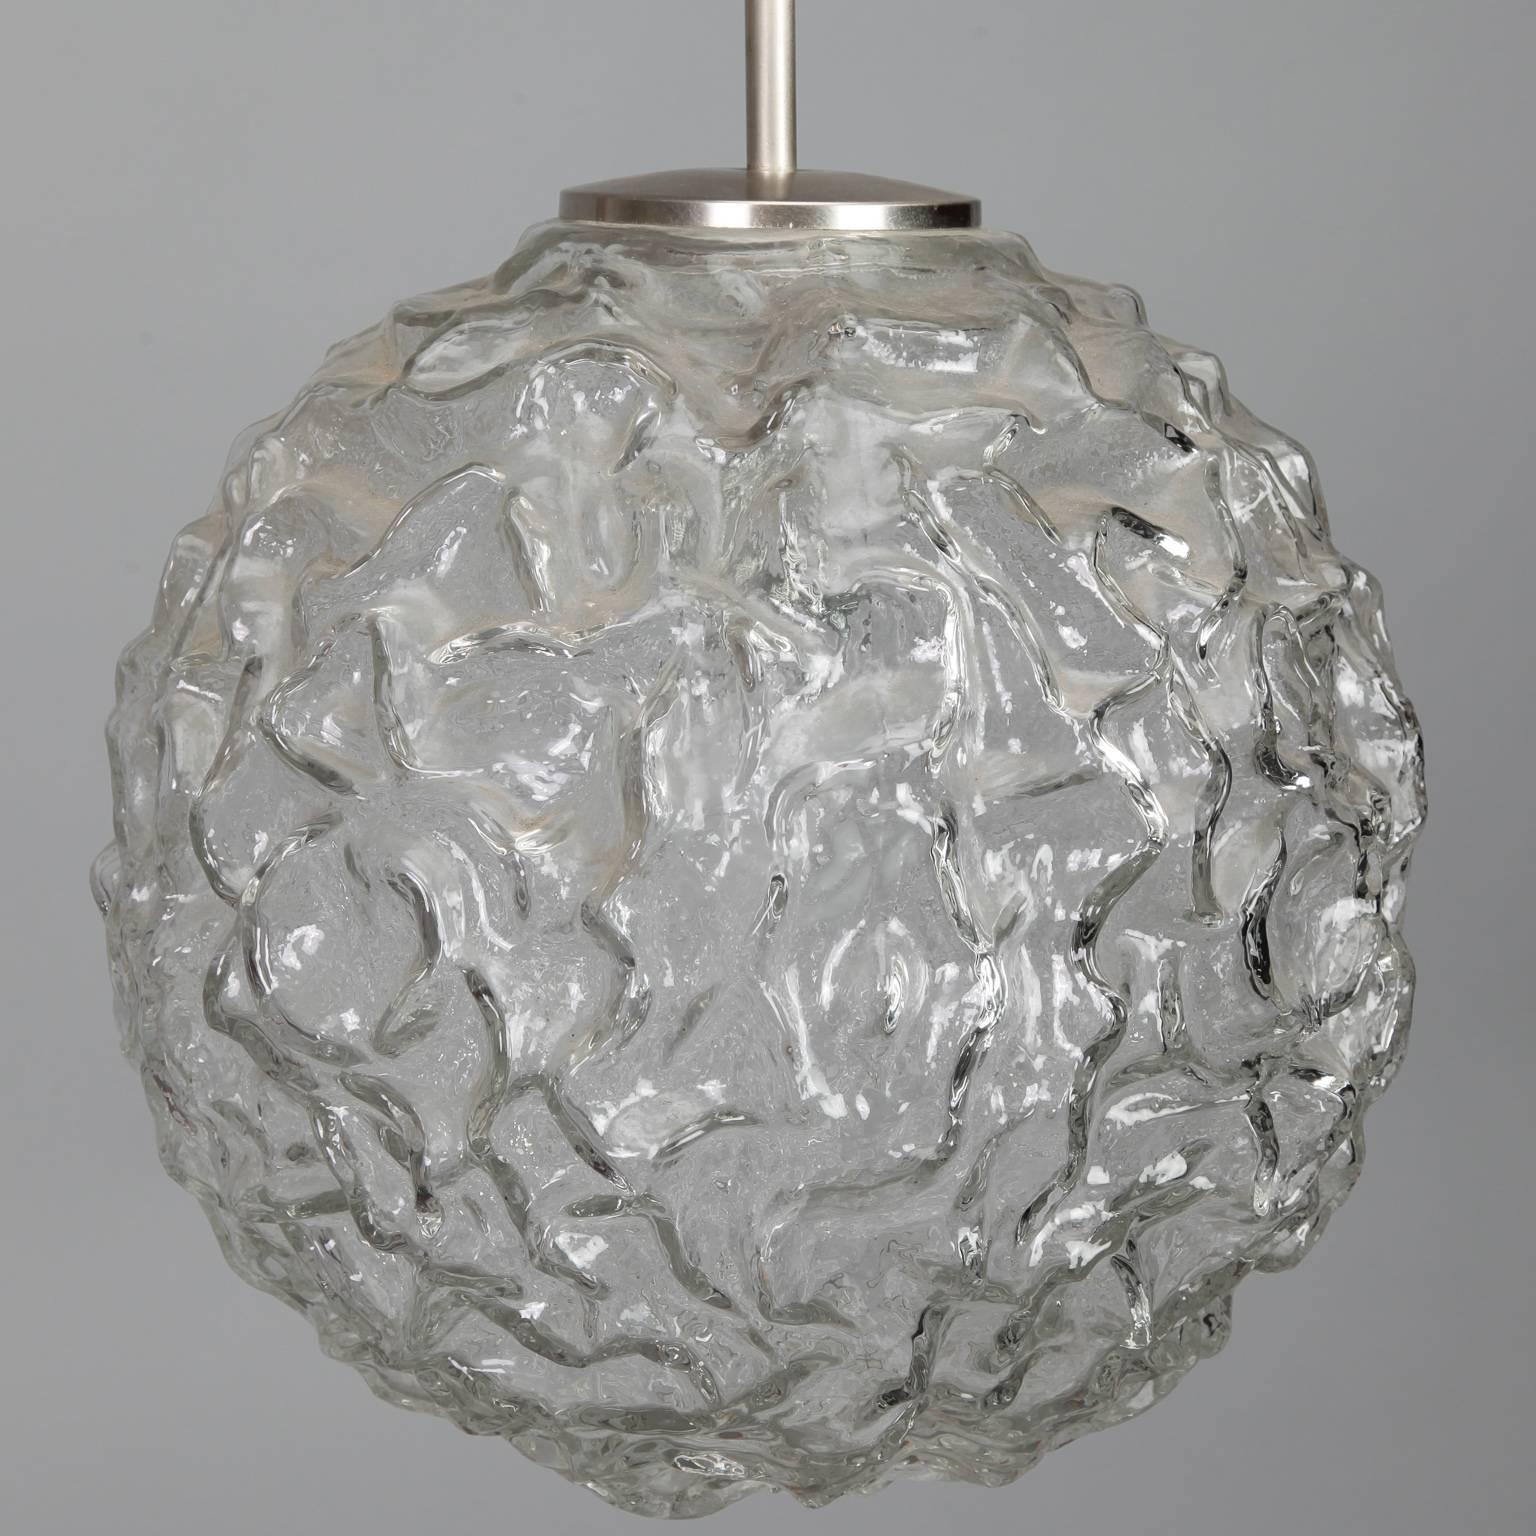 Globe shaped pendant fixture of thick, clear molded glass with a wavy surface texture. Polished nickel cylinder canopy and adjustable electrical cord, circa 1970s. New wiring for US electrical standards.